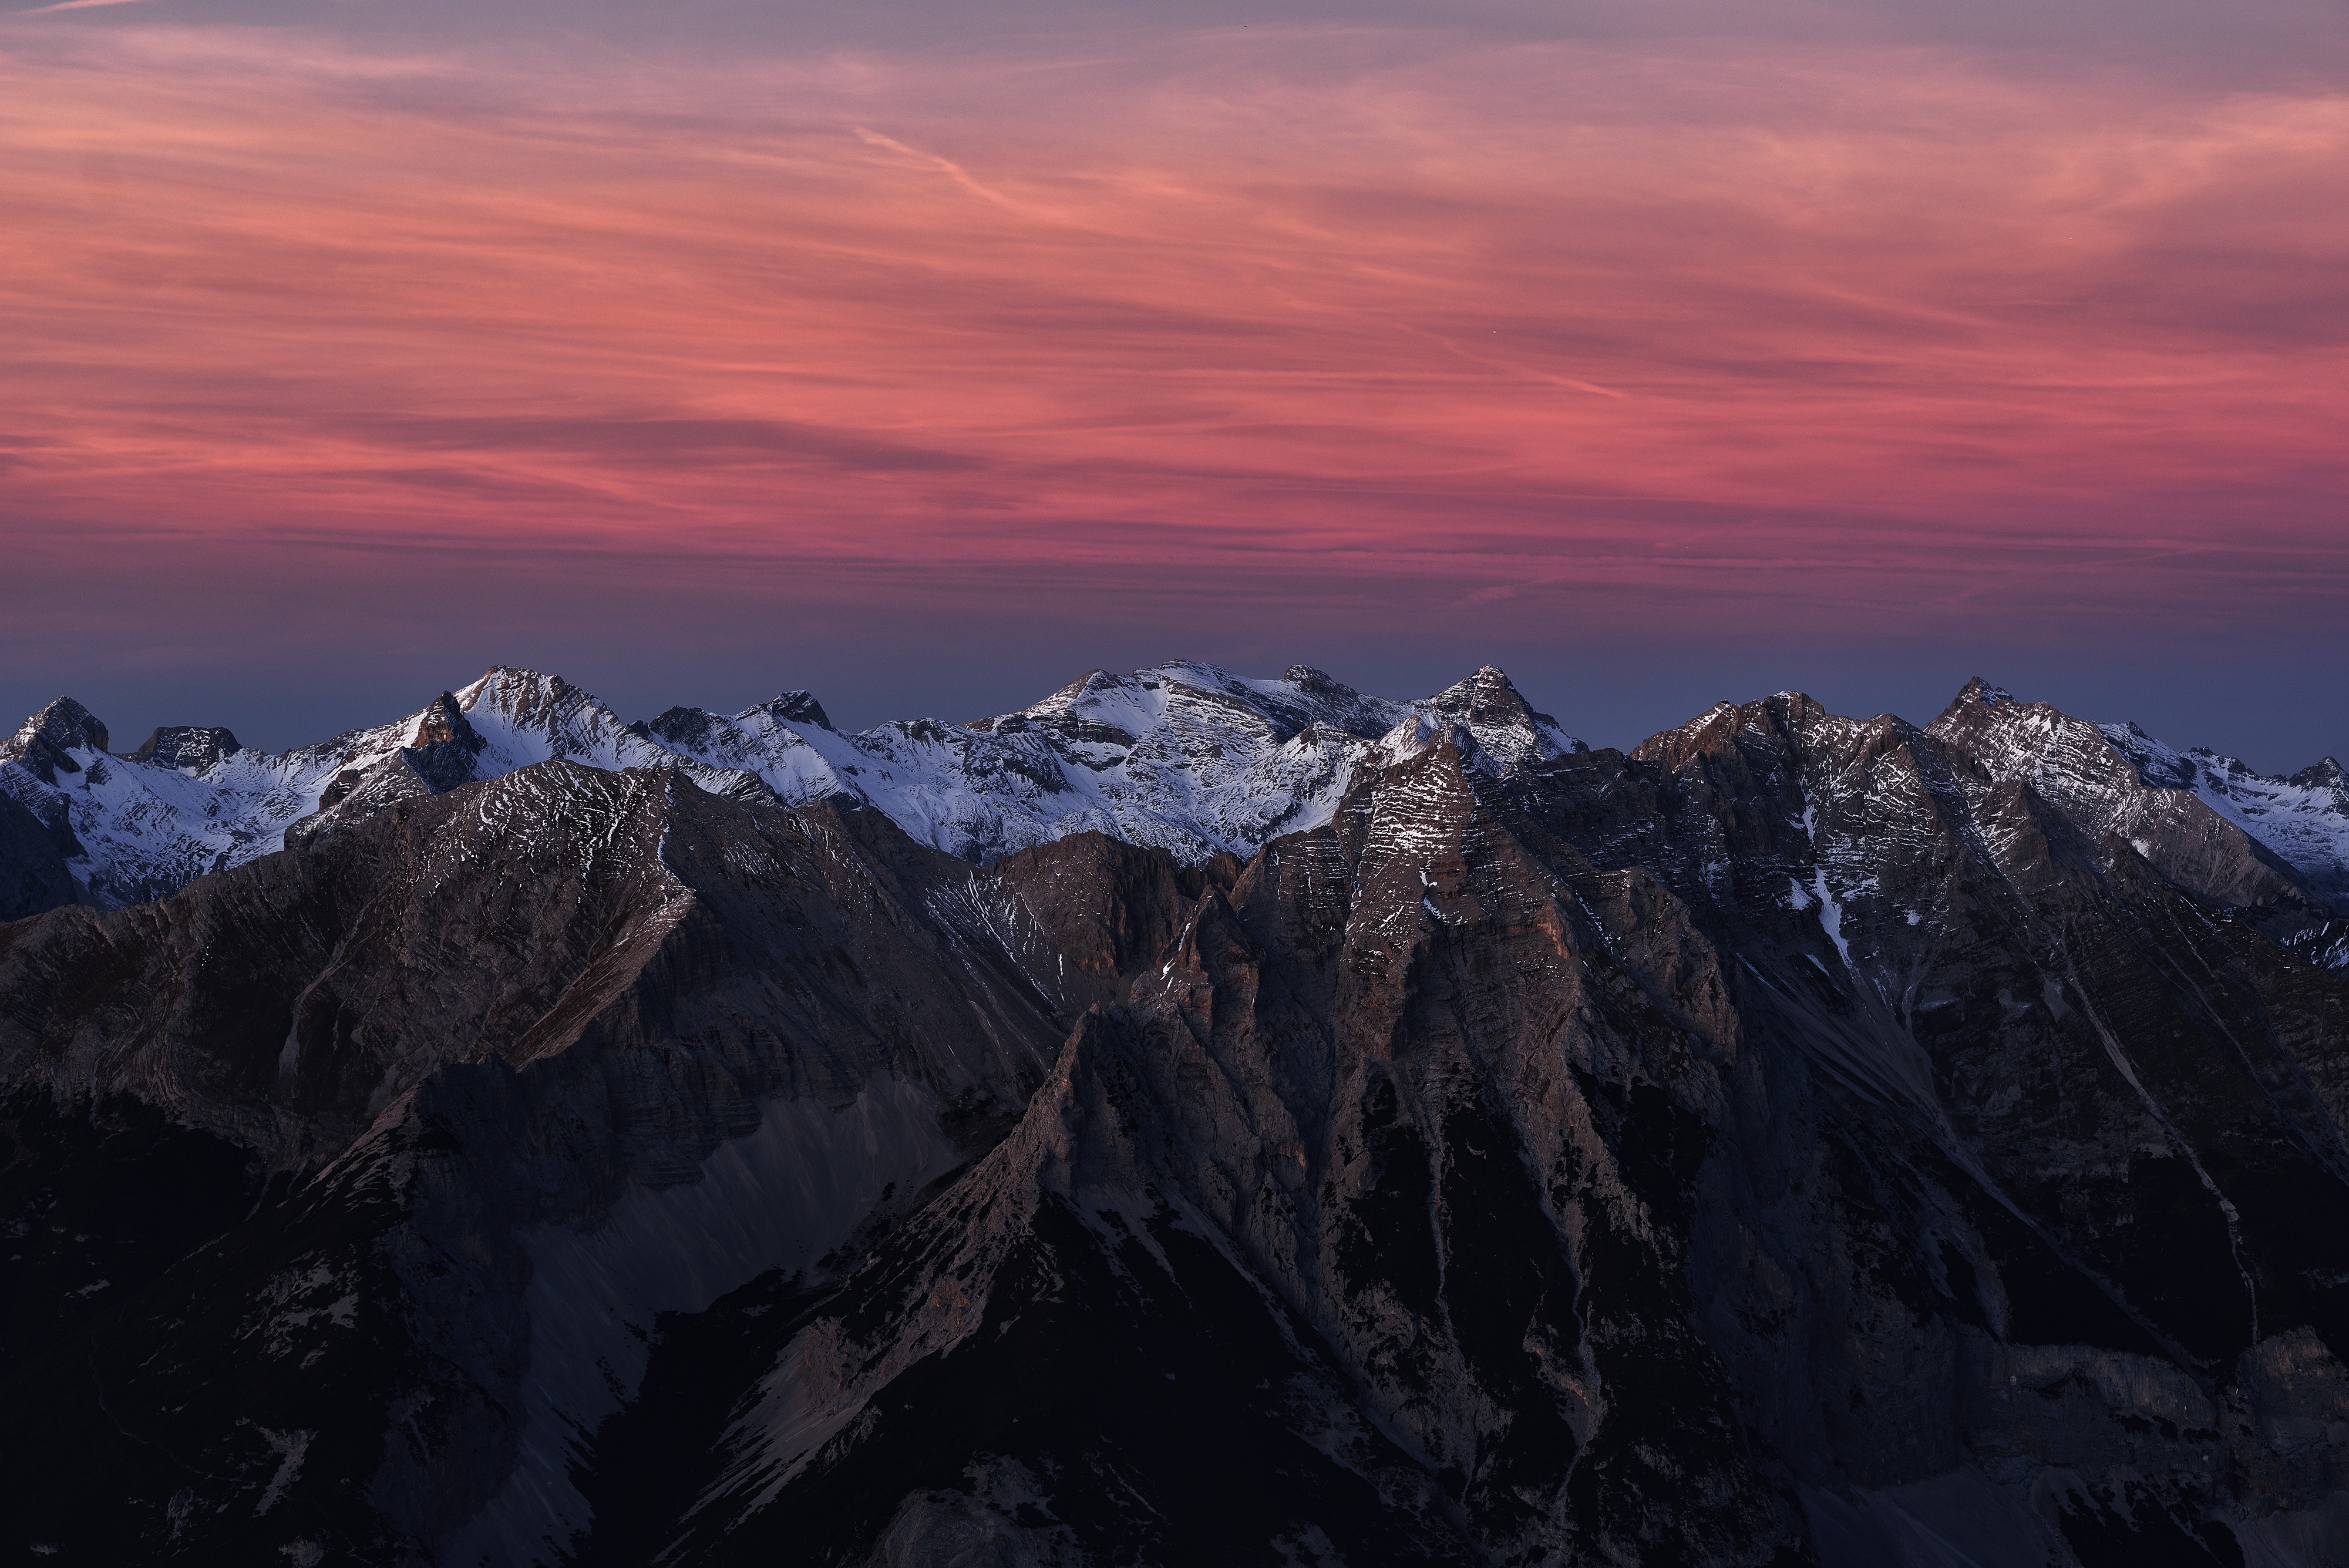 General 4000x2670 landscape mountains sky sunset snowy peak clouds red sky